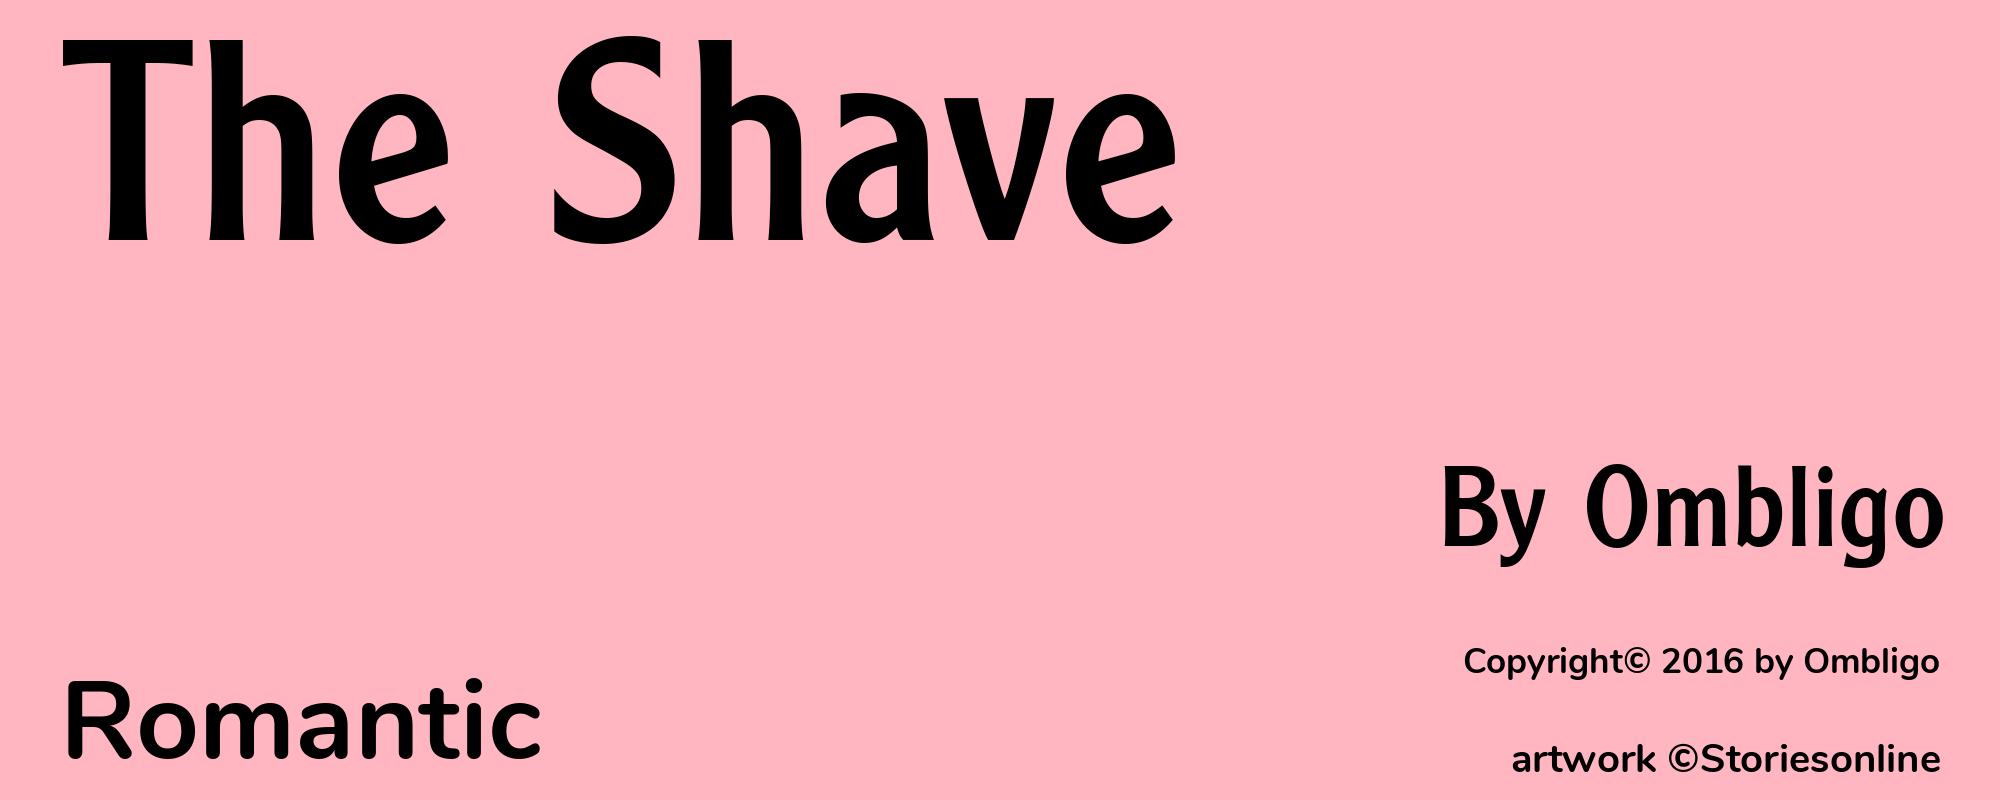 The Shave - Cover